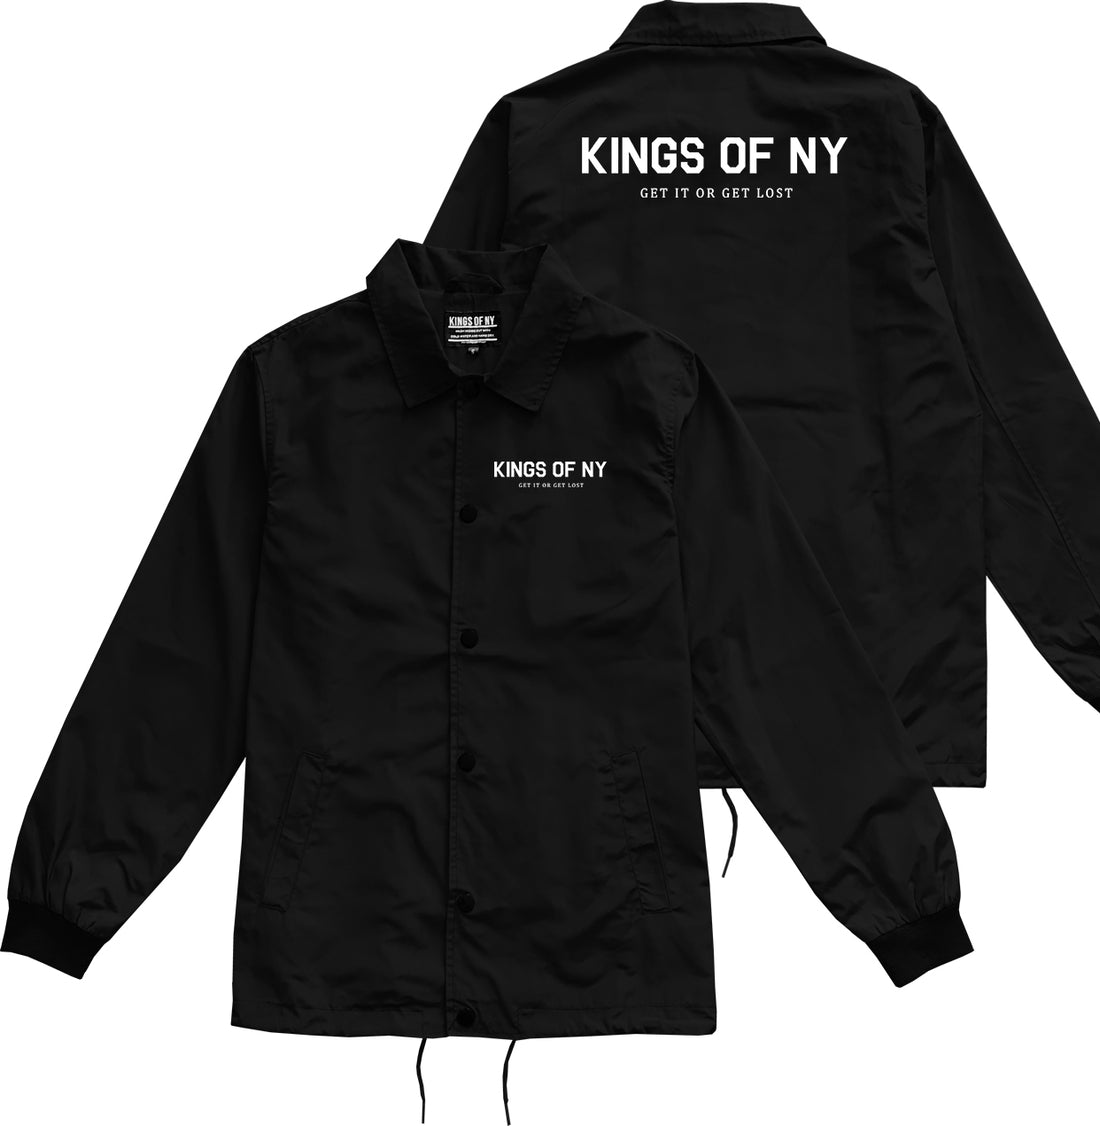 Get It Or Get Lost Mens Coaches Jacket Black by Kings Of NY